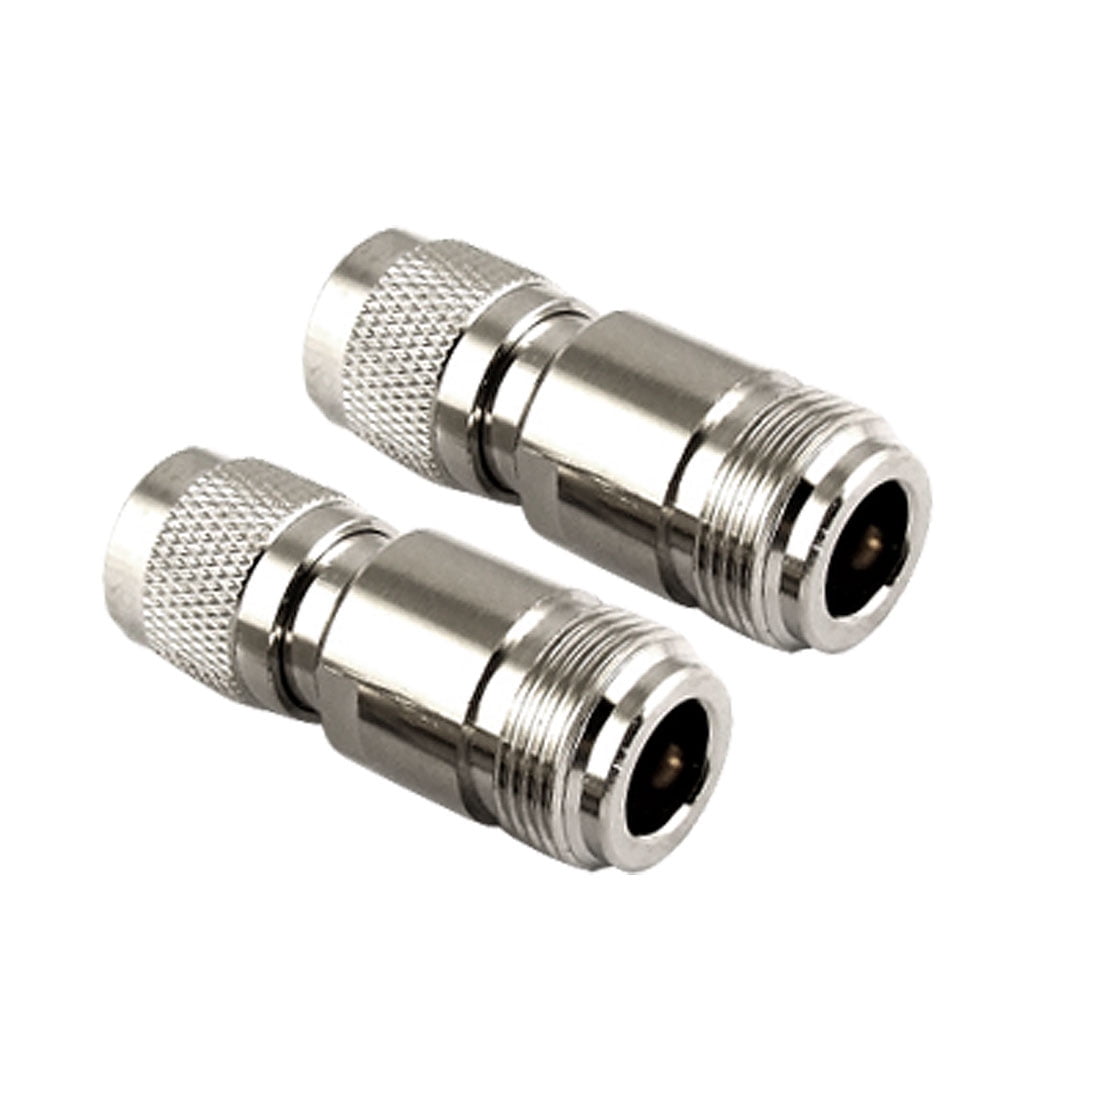 10pcs TNC Male Plug to BNC Female Jack RF Coaxial Adapter Connector for sale online 